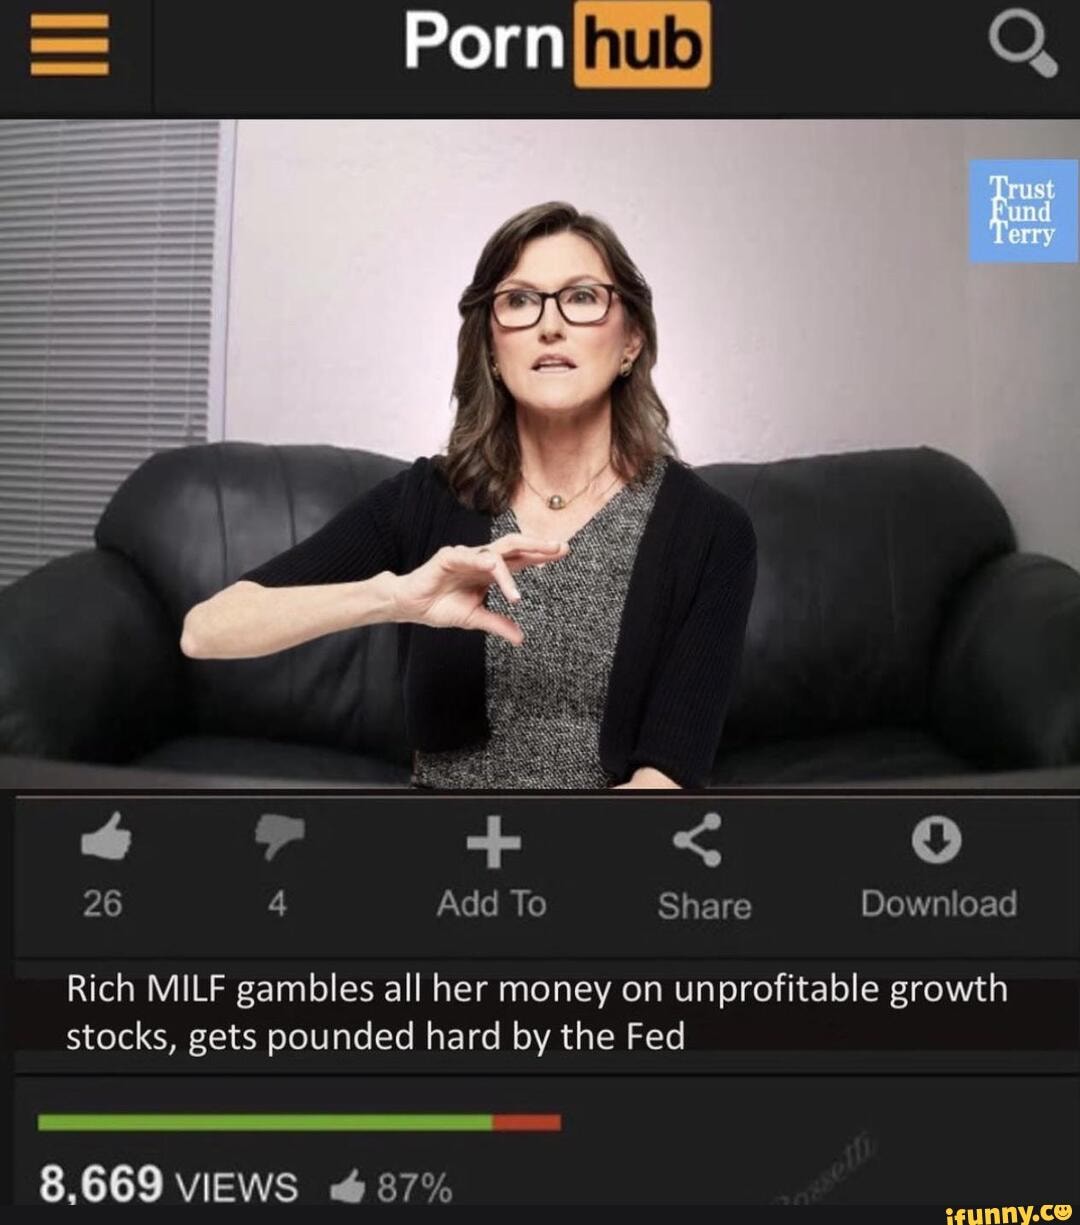 Porn hub Q, Terry 26 Add To Share Download Rich MILF gambles all her money  on unprofitable growth stocks, gets pounded hard by the Fed 8.669 VIEWS @  87% - iFunny Brazil